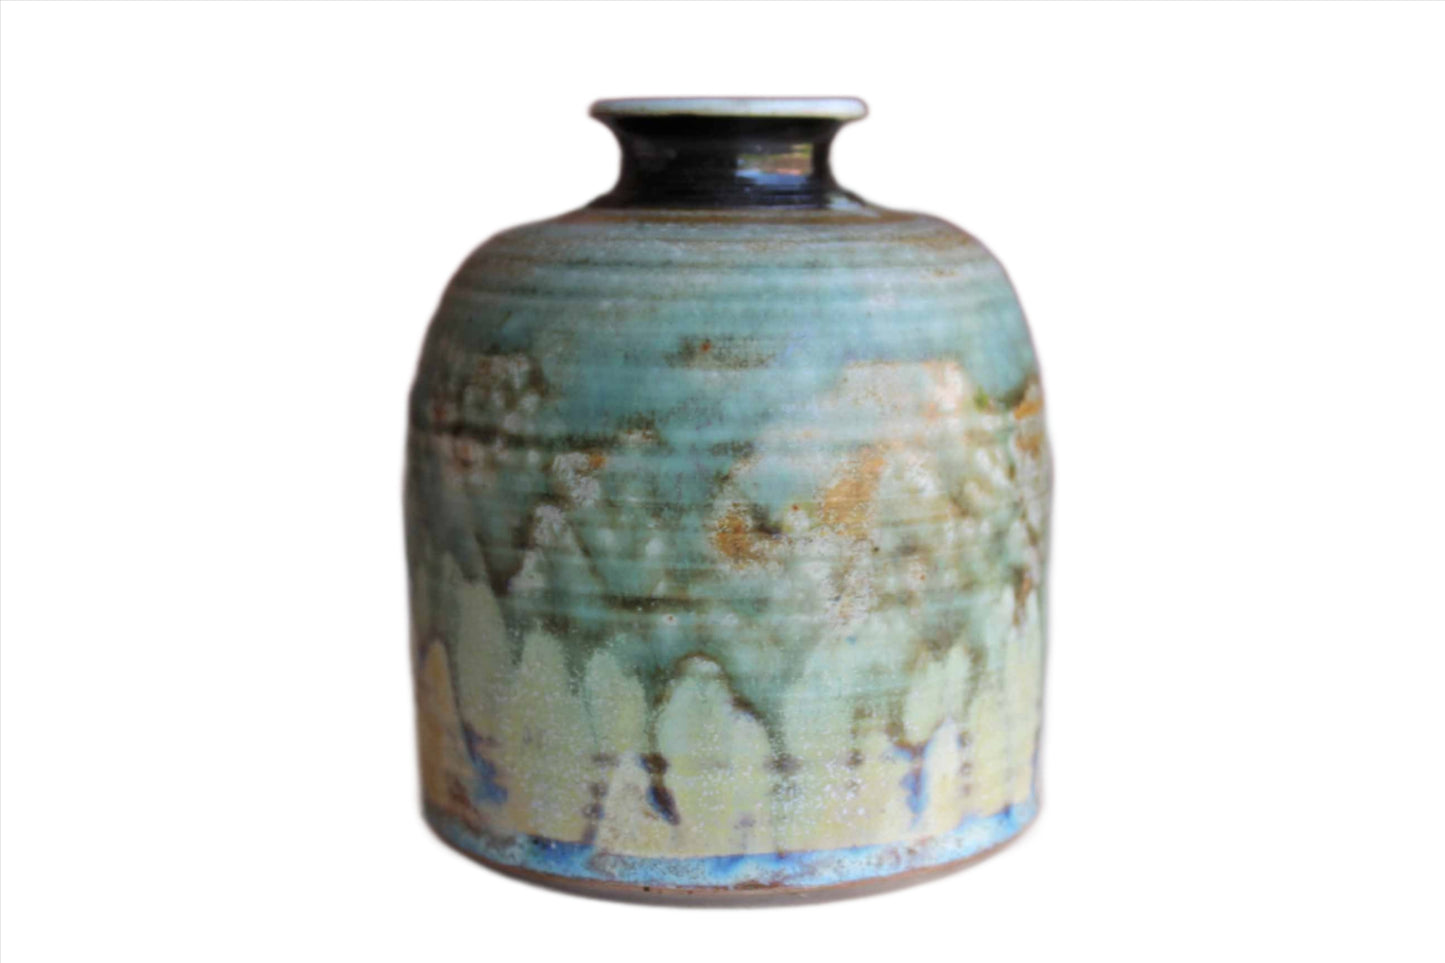 Handmade Stoneware Flower Vase with Blue, Green and Yellow Glazes